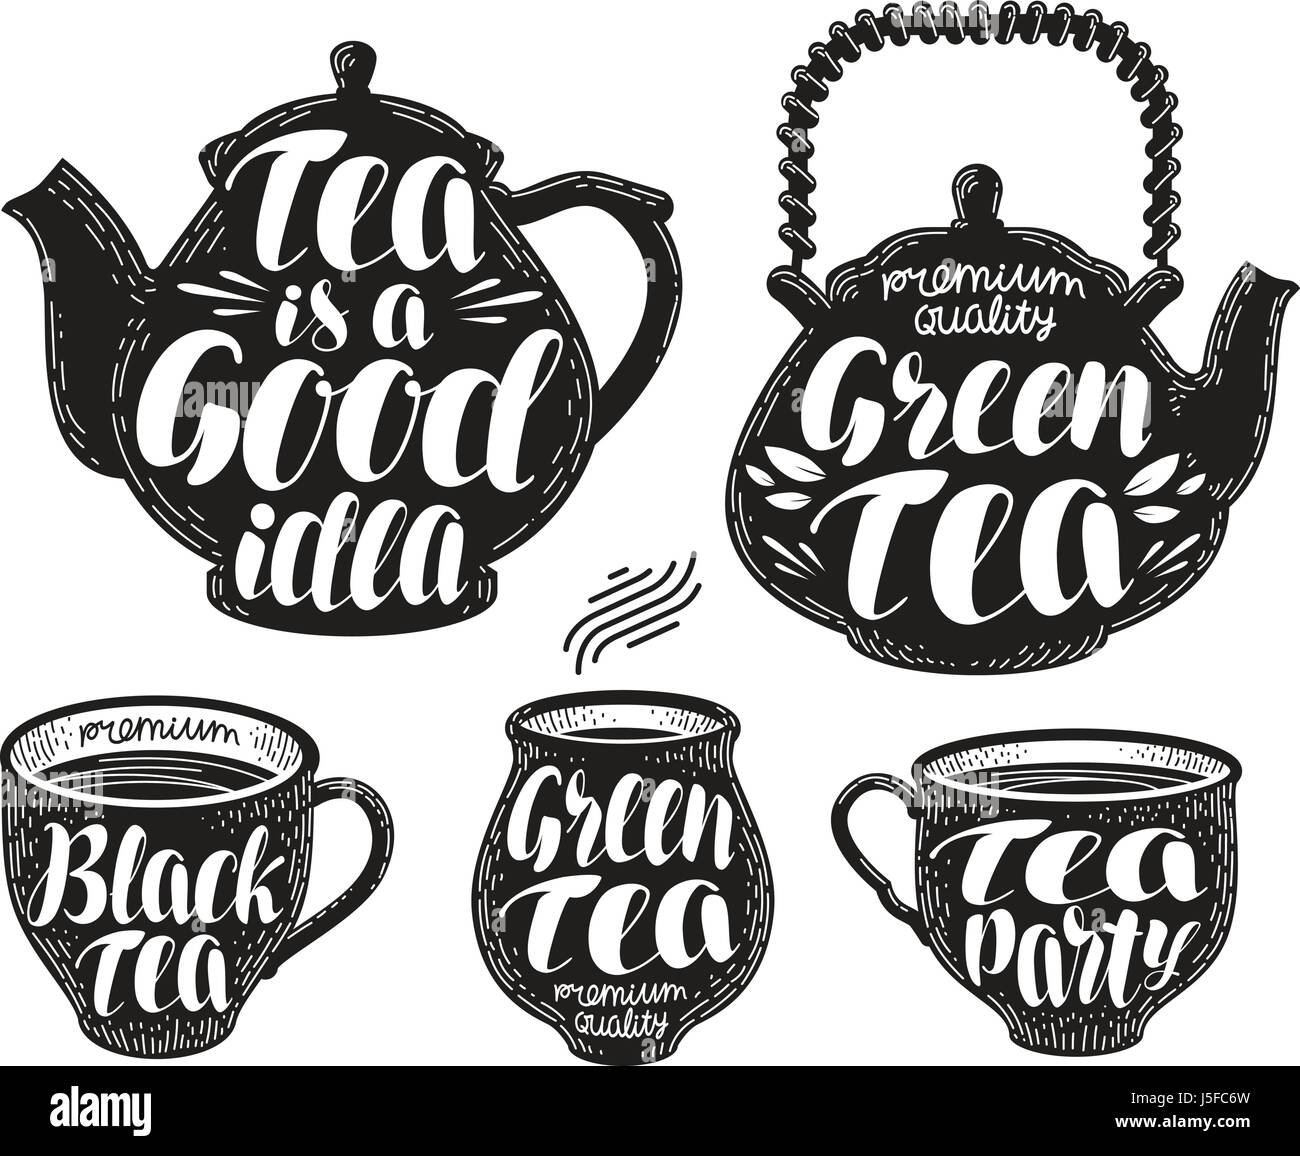 Tea label set. Teapot, cup, hot drink icon or symbol. Handwritten lettering, calligraphy vector illustration Stock Vector